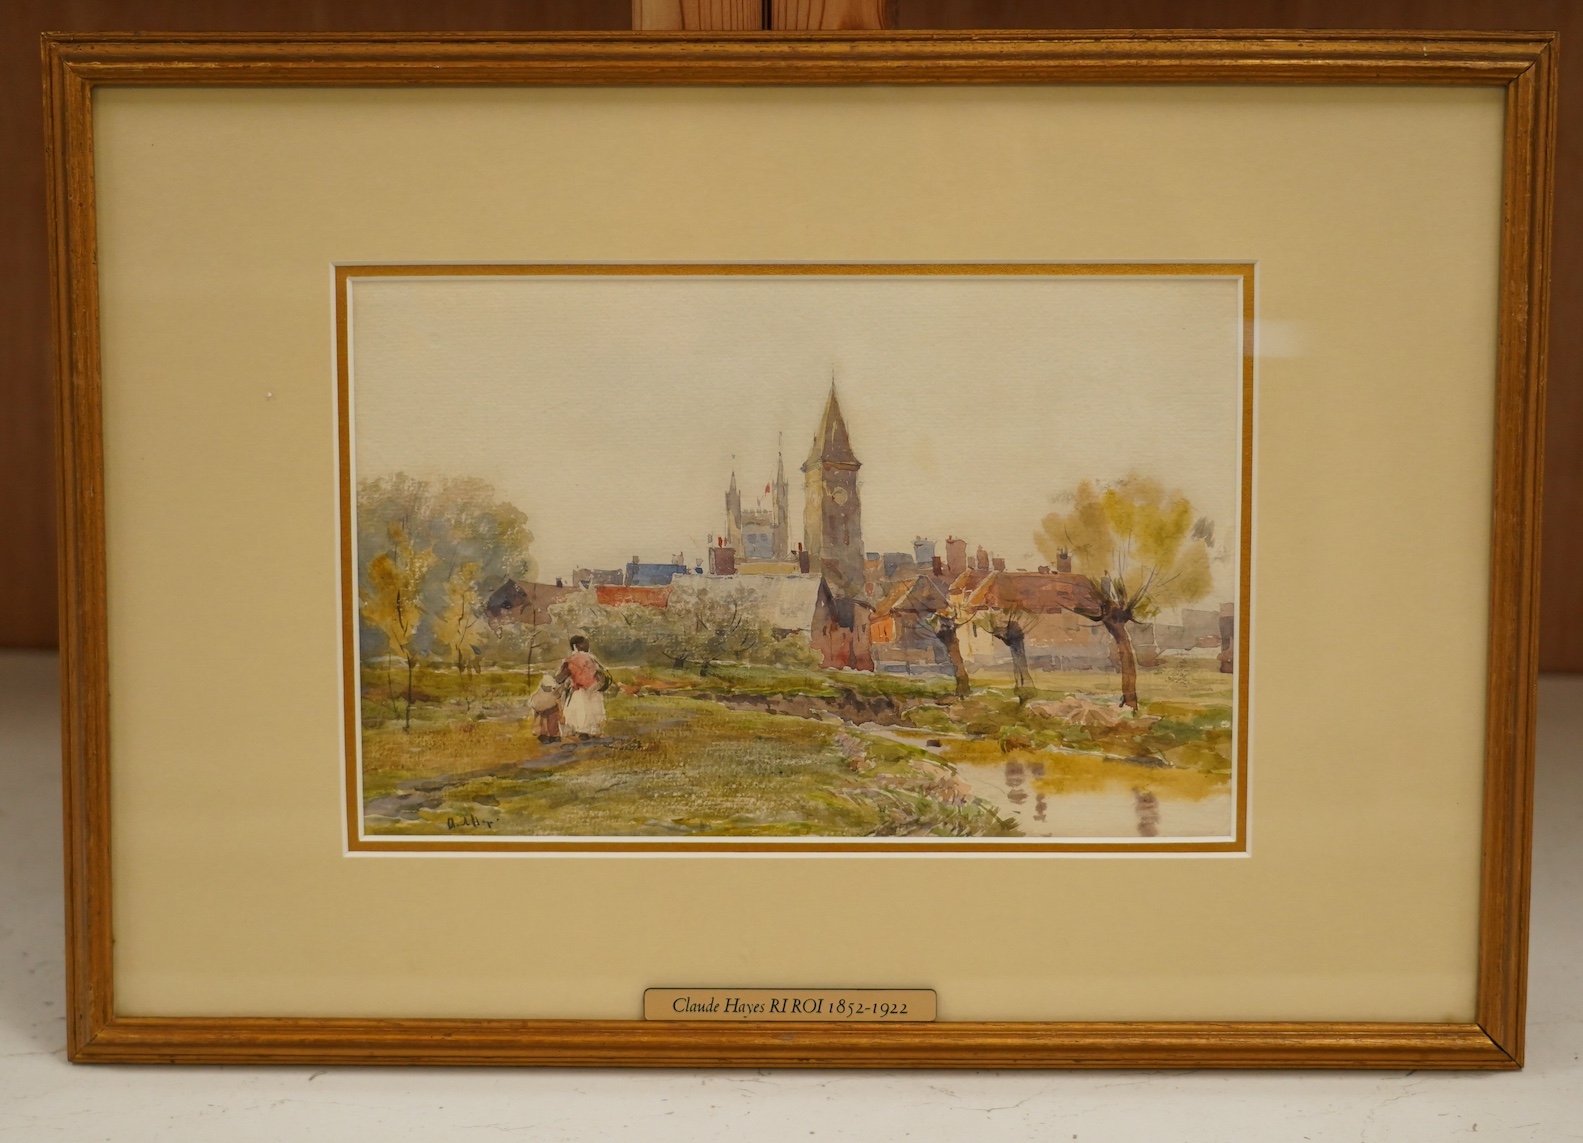 Claude Hayes (1852-1922), two watercolours, Town scene with church and Harbour scene, each signed, largest 16 x 26cm. Condition - poor to fair, discolouration to the paper